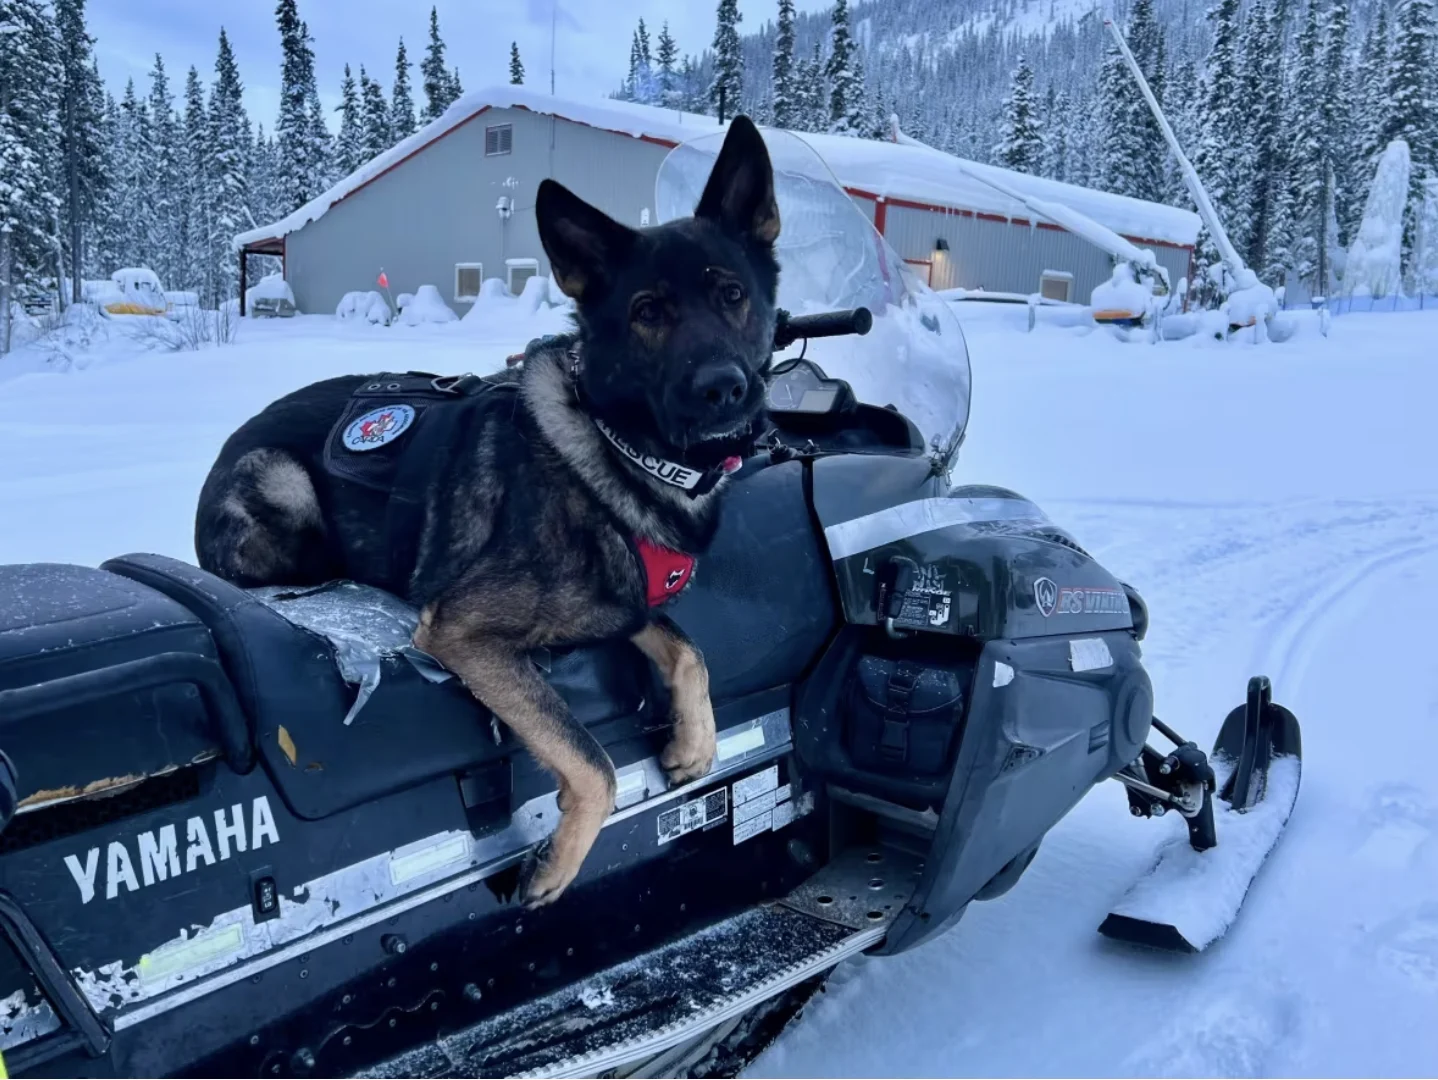 cbc: Kipper will be spending most of his time at Mt Sima, but is also available to respond to incidents in the wider Yukon, and northern B.C. (Katie Todd/CBC)